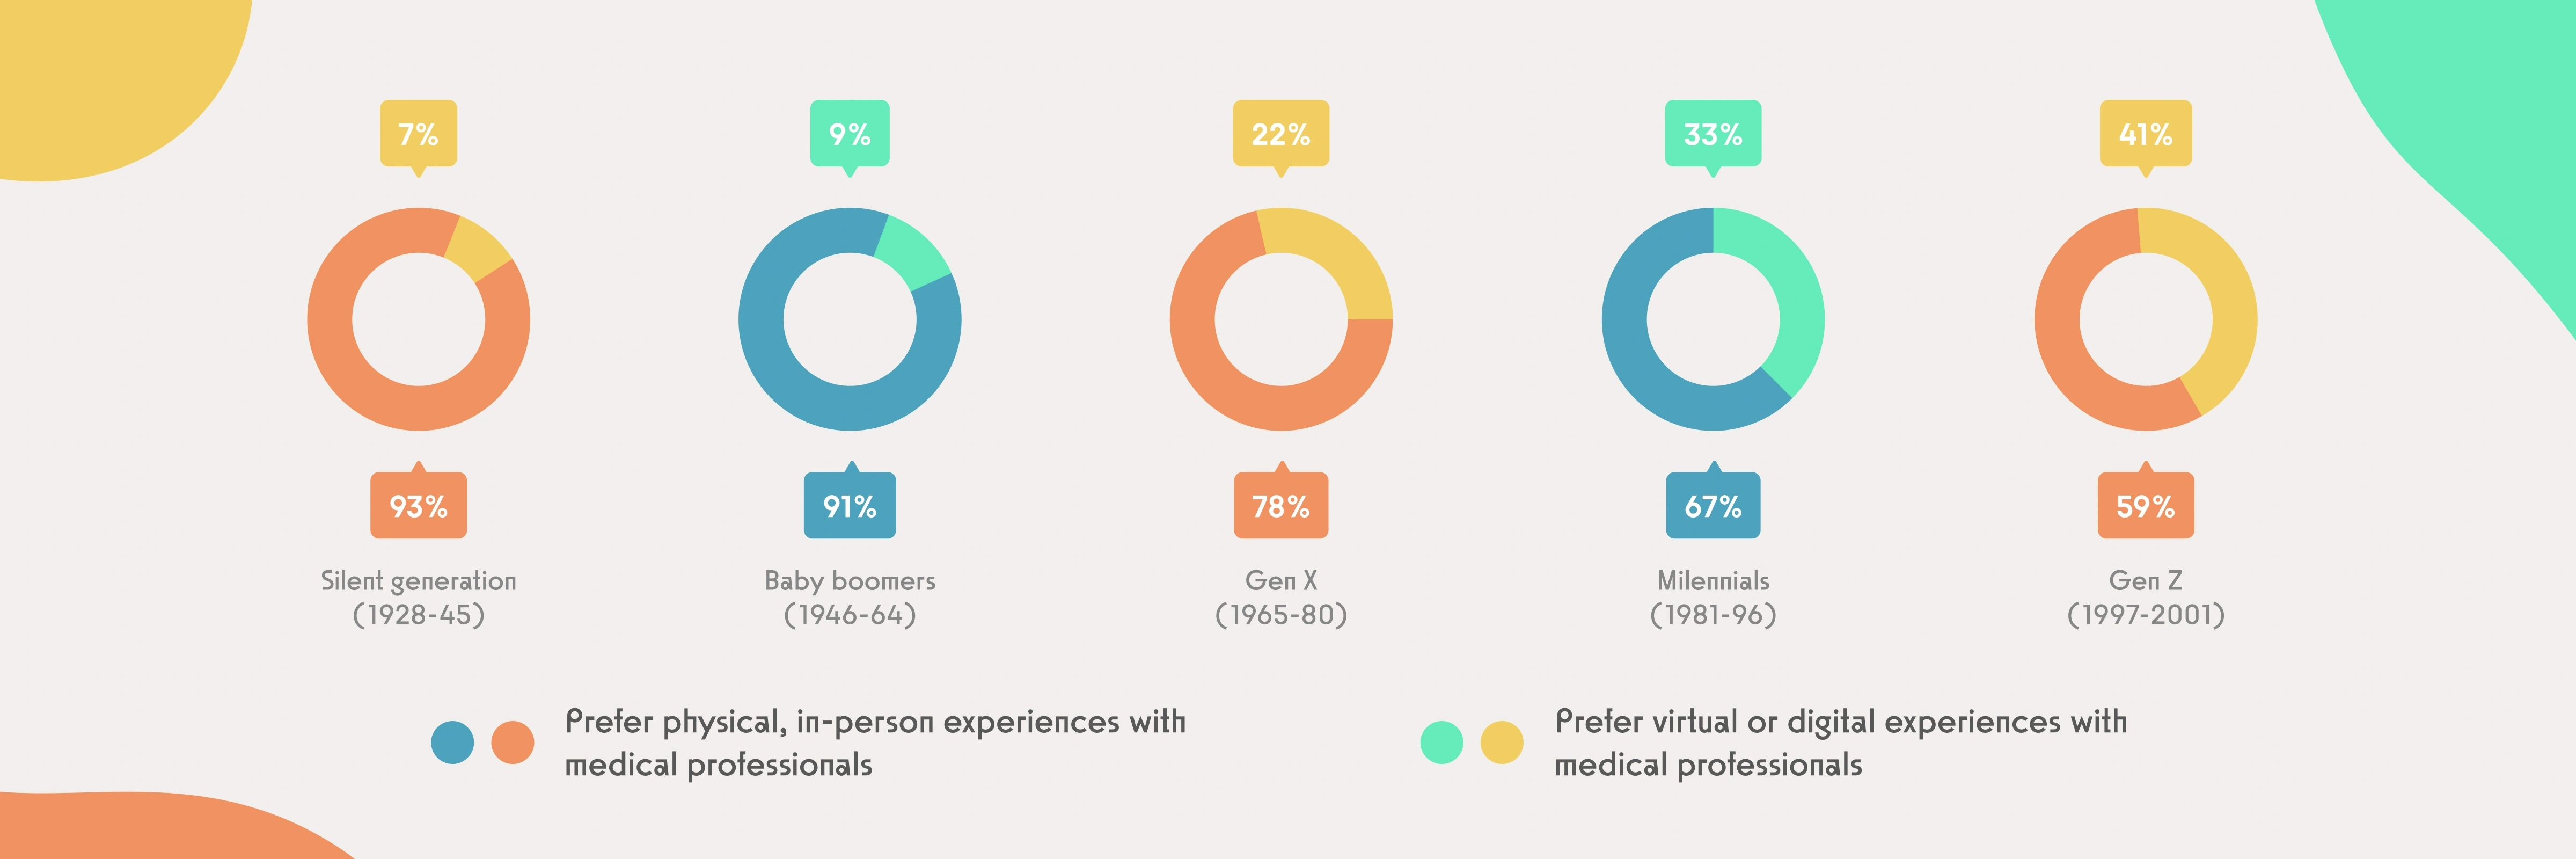 A statistics about different generations preferences between a virtual and in-person experiences with medical professionals